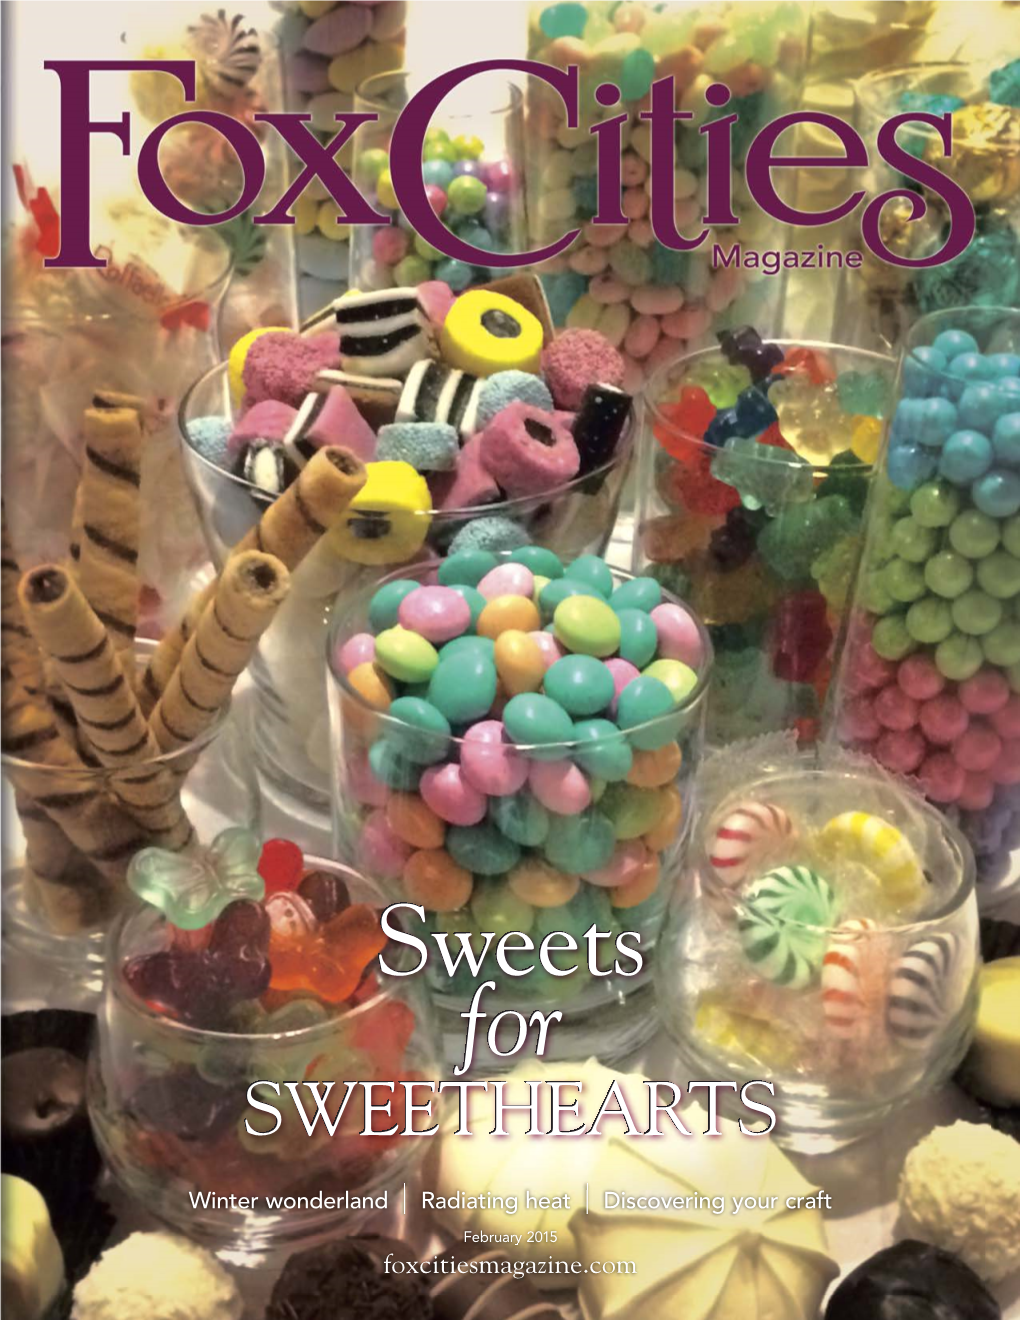 Sweets for Sweets